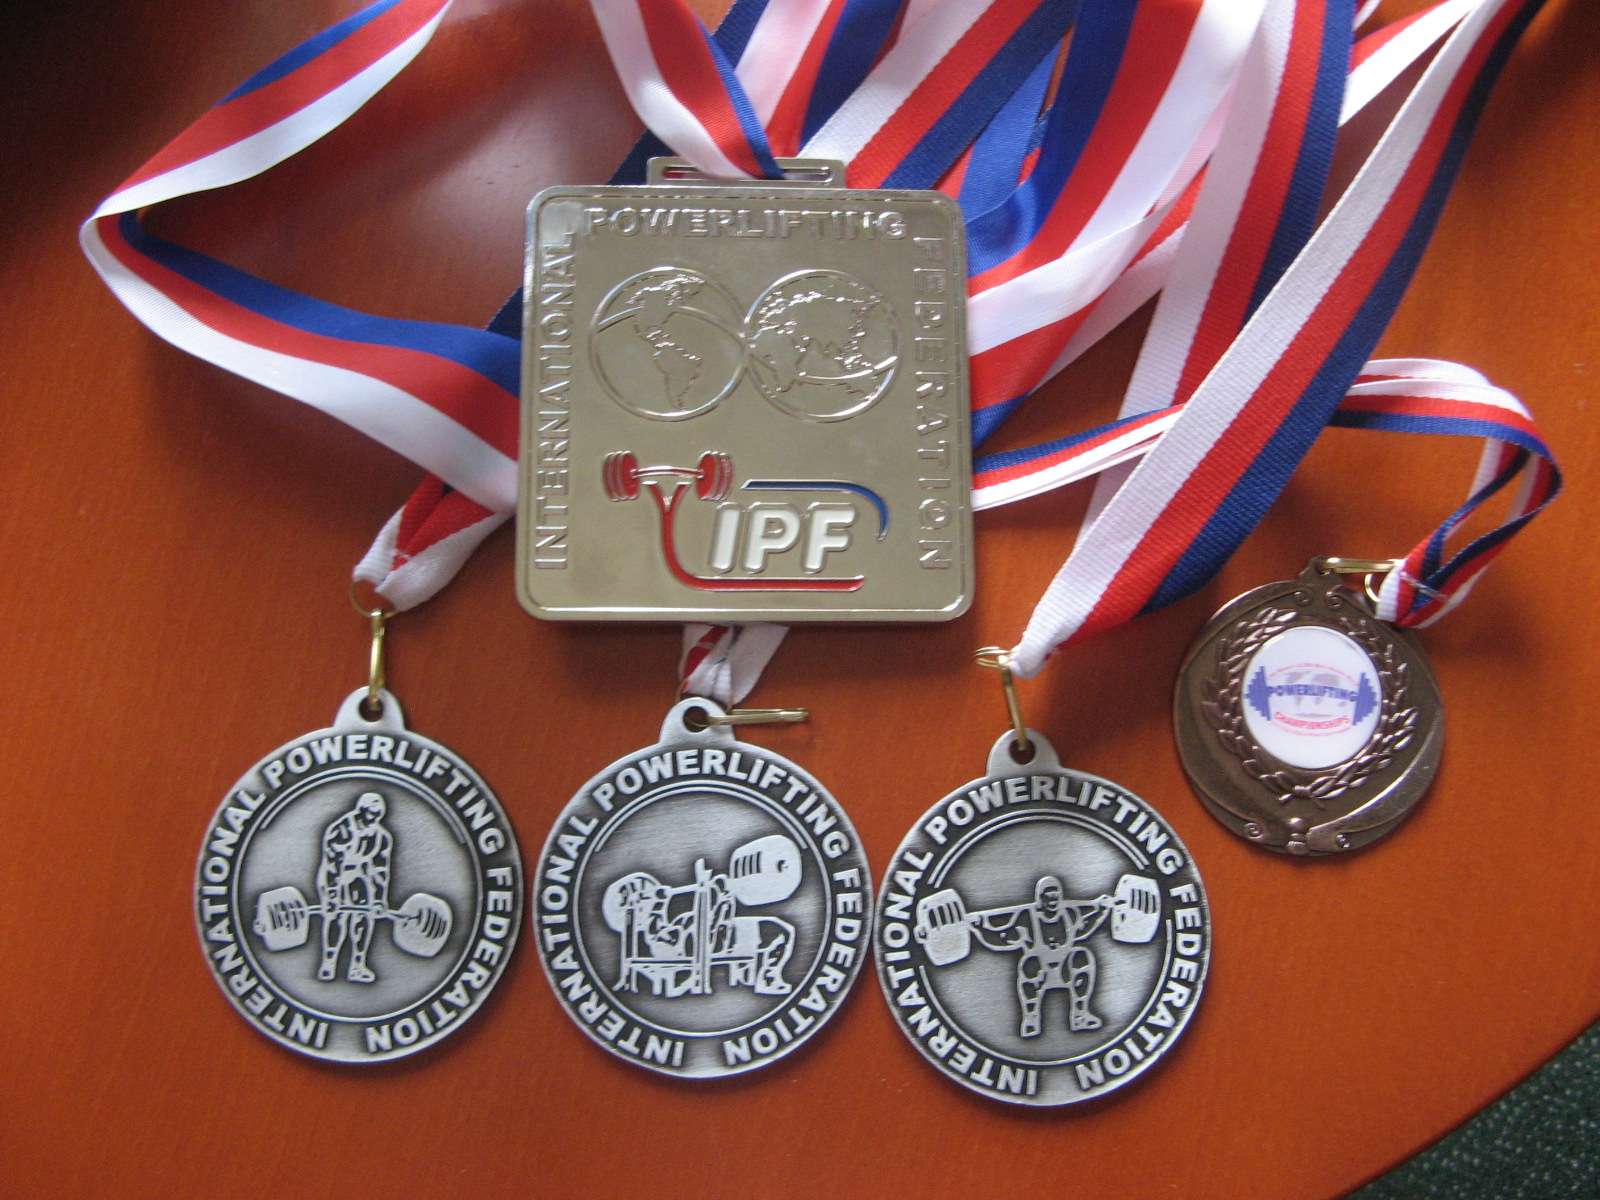 2010 IPF World Masters Silver medals